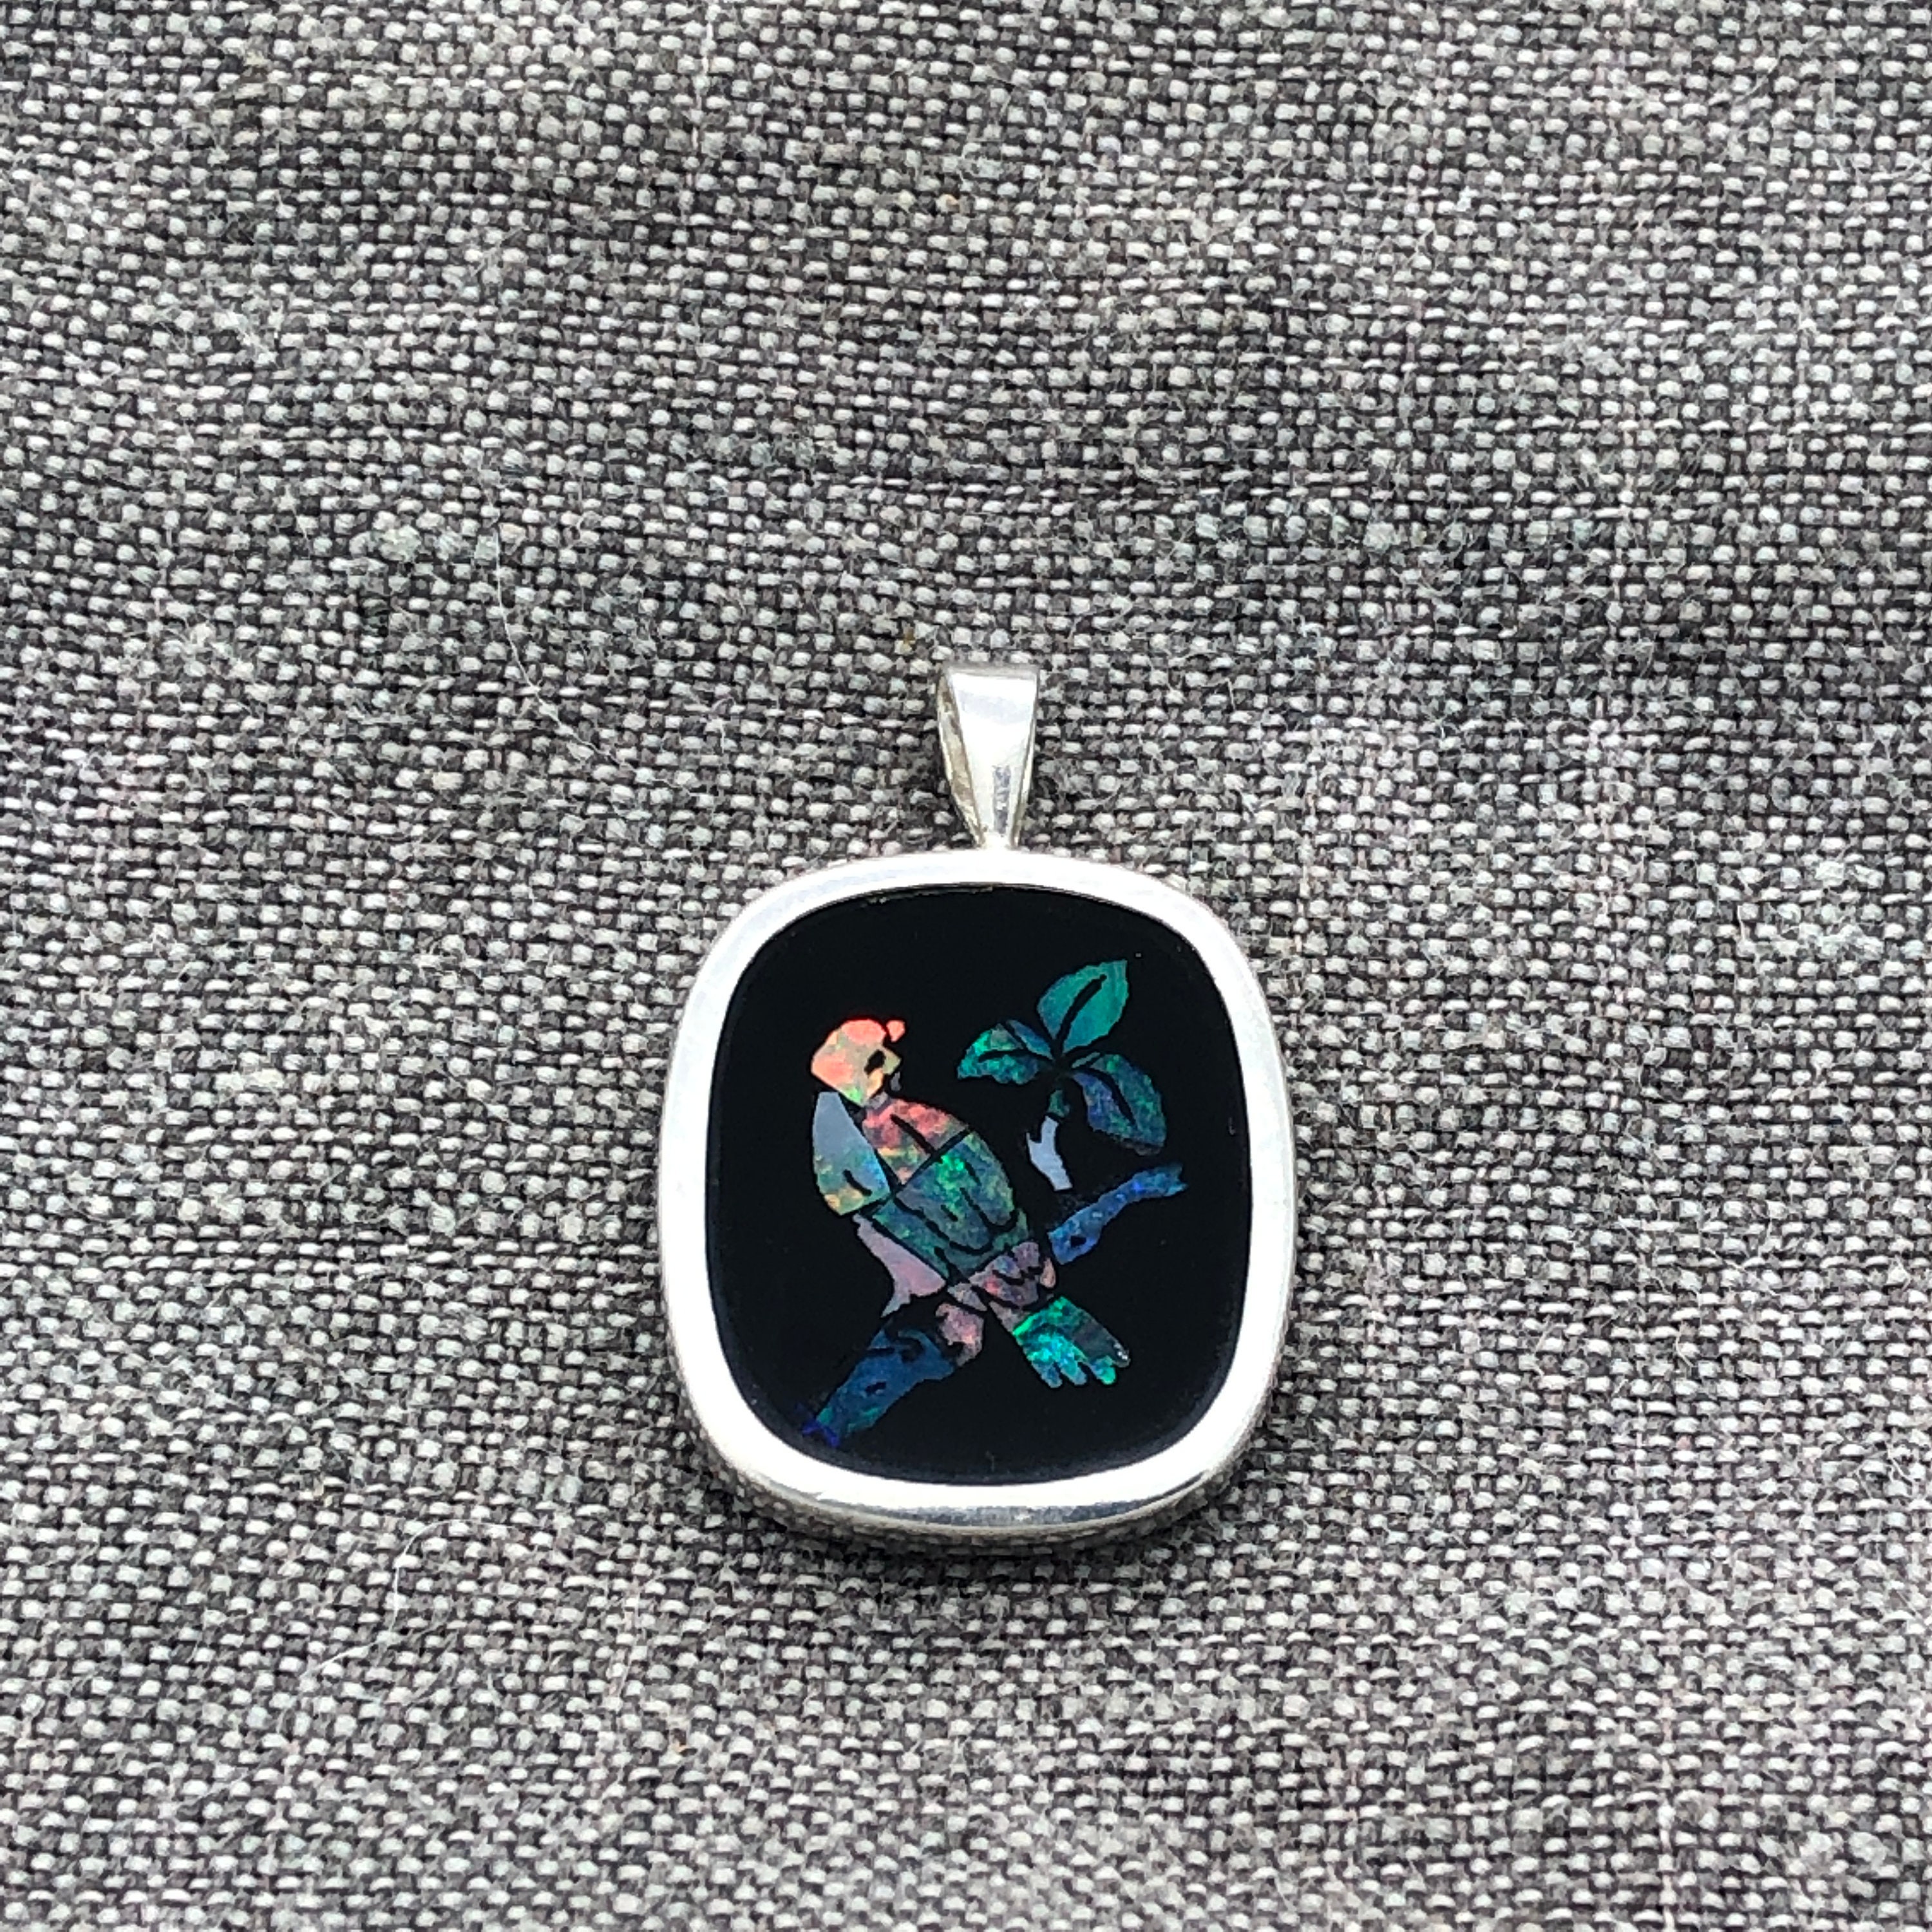 Vintage Sterling Silver Opal Inlay in Onyx Bird Pendant Opal Inlay Bird Pendant Vintage Lovebird Pendant Opal Pendant Onyx Pendant